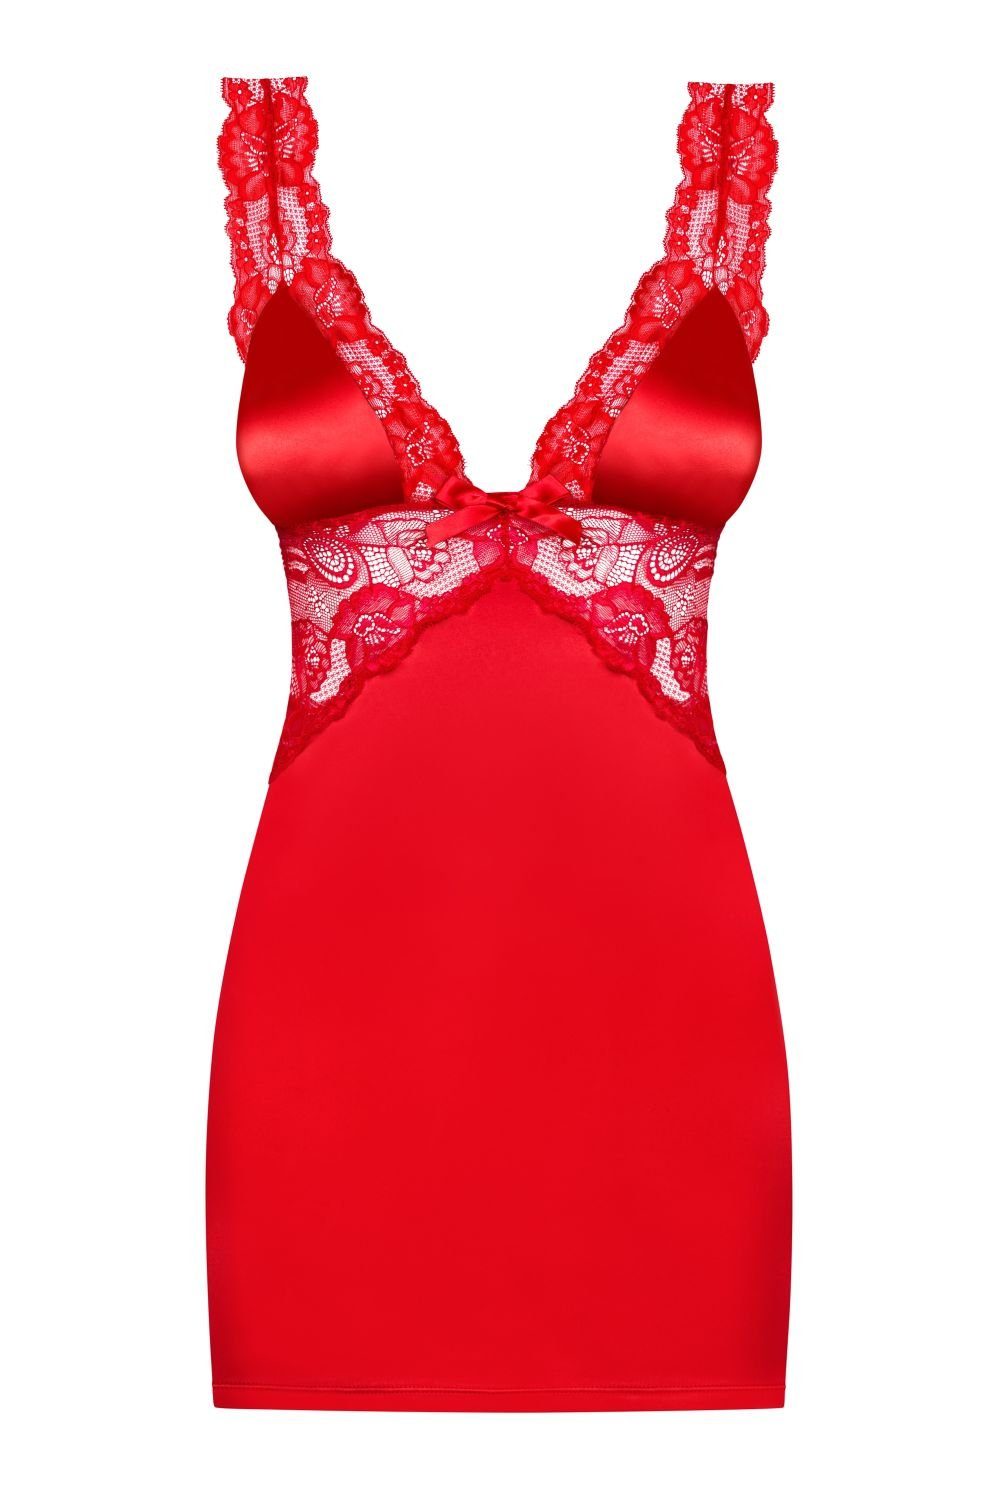 Obsessive Negligé Negligee Secred Babydoll Stretch (2-tlg) Dessous rot String Chemise mit